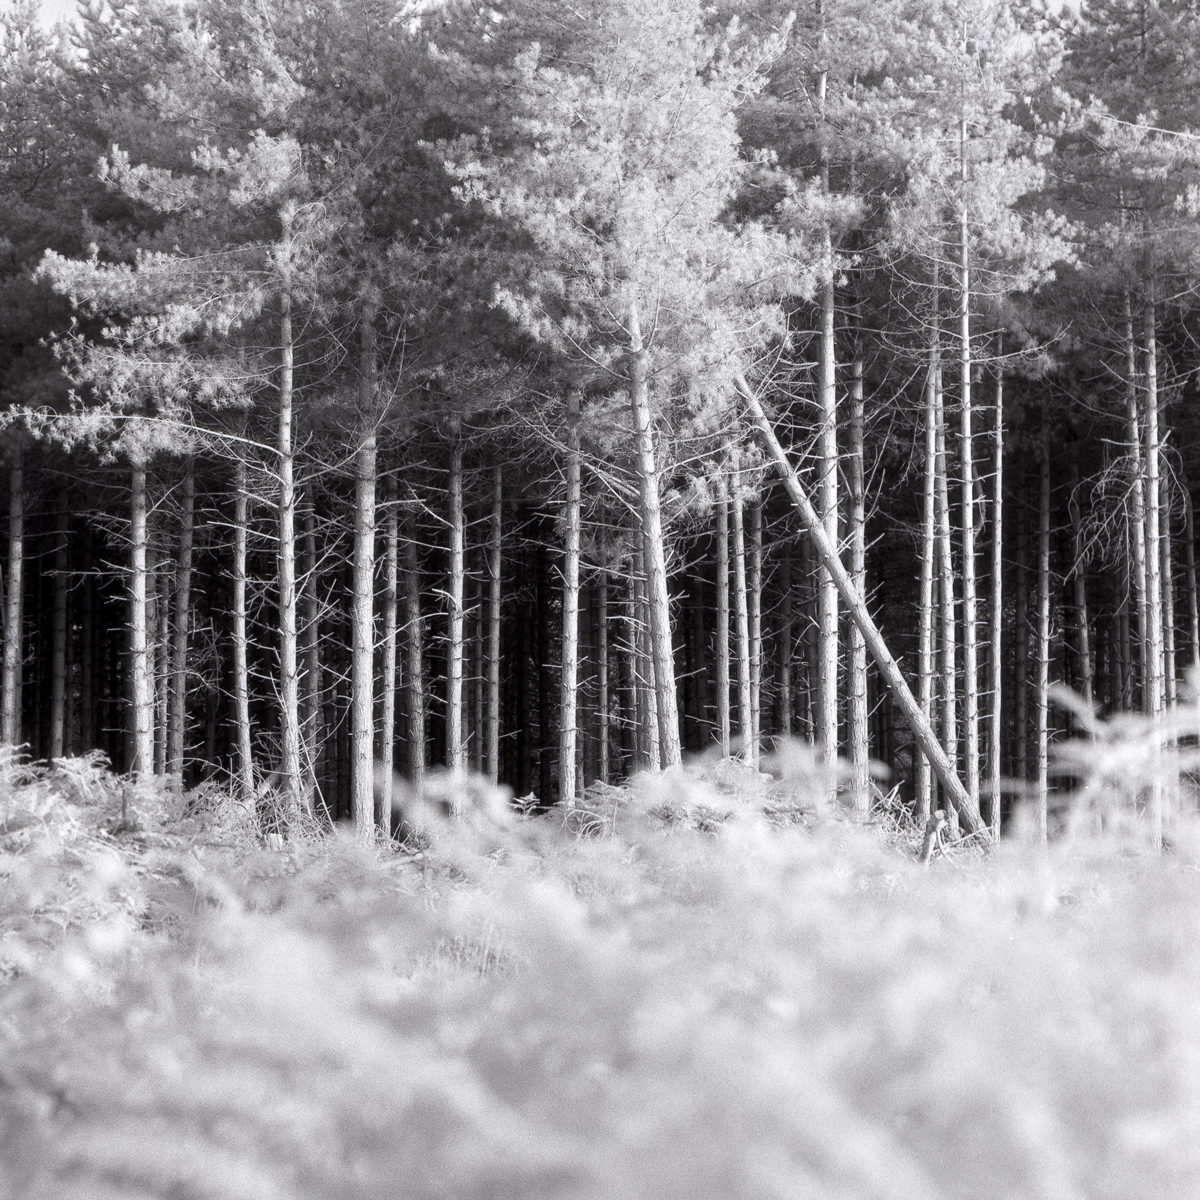 Dunwich Forest, Suffolk. Taken on a Bronica SQAi with Ilford SFX 200 and a 720 filter. Developed Ilfotec HC 1+31.